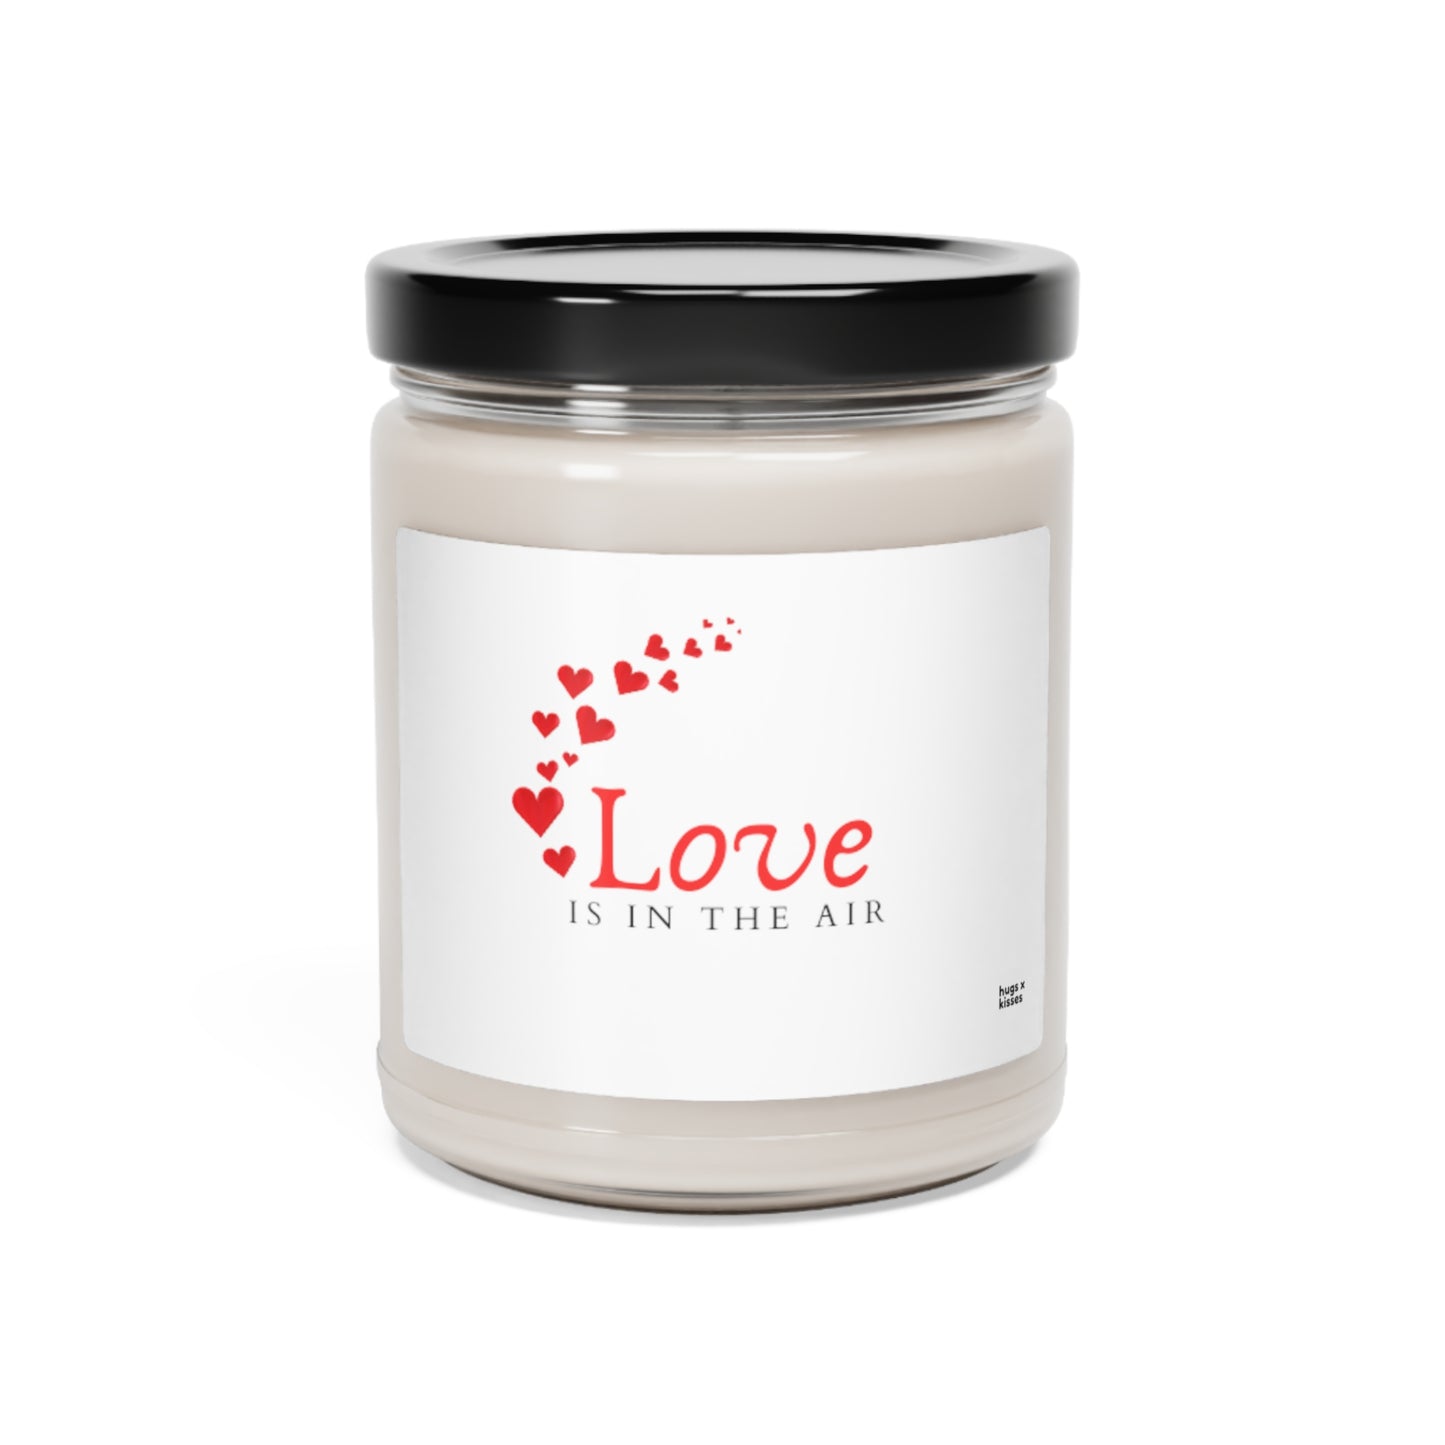 Love is in the Air Scented Candle, 9oz